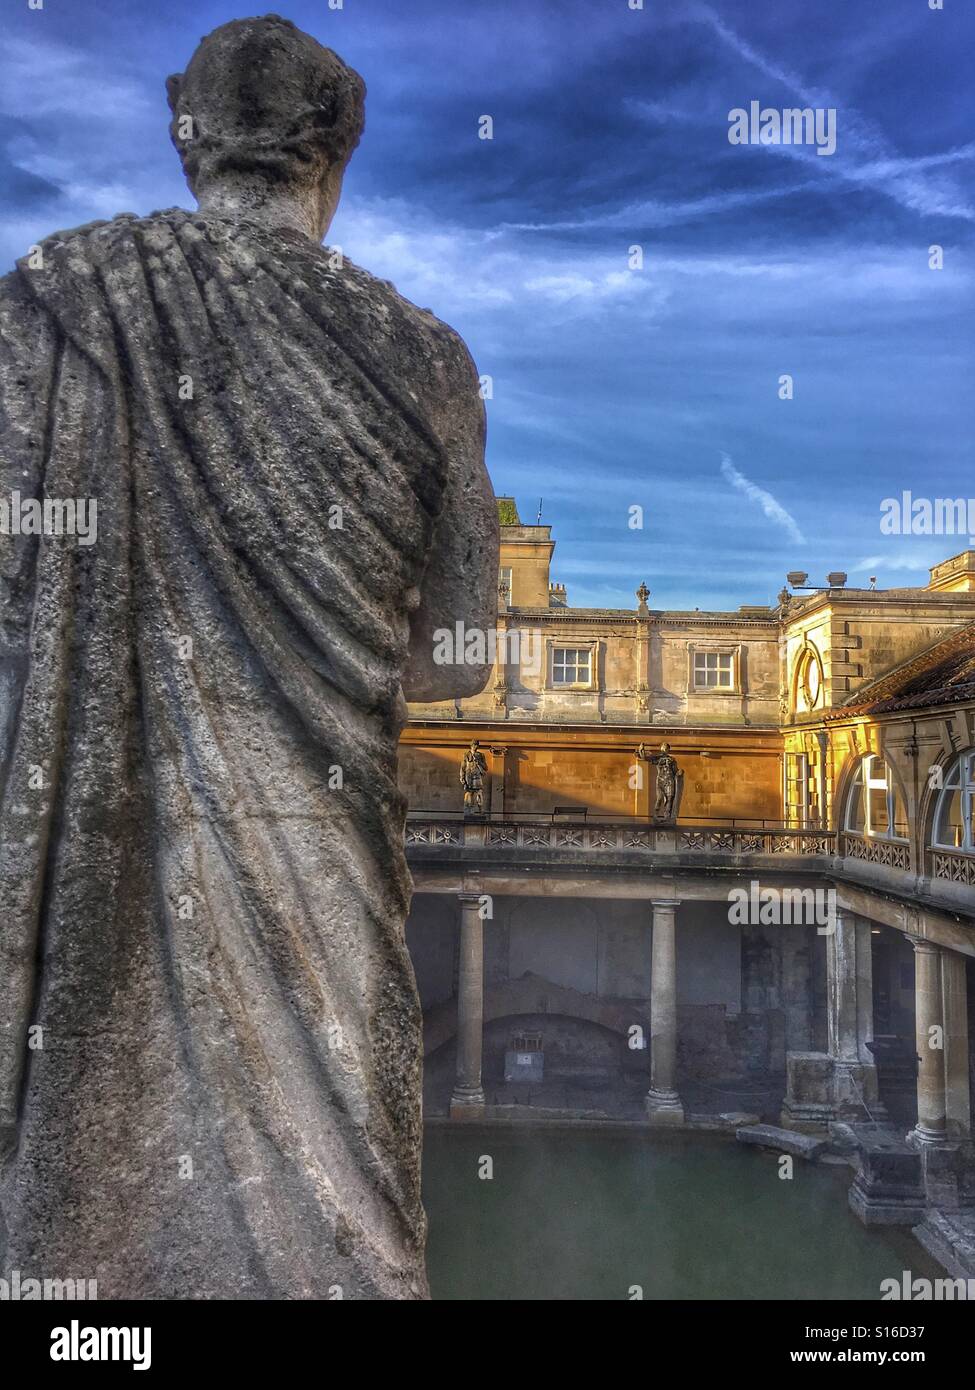 The Roman Baths, Bath, Somerset. England. Looking down onto The Great Bath from the upper terrace. Stock Photo